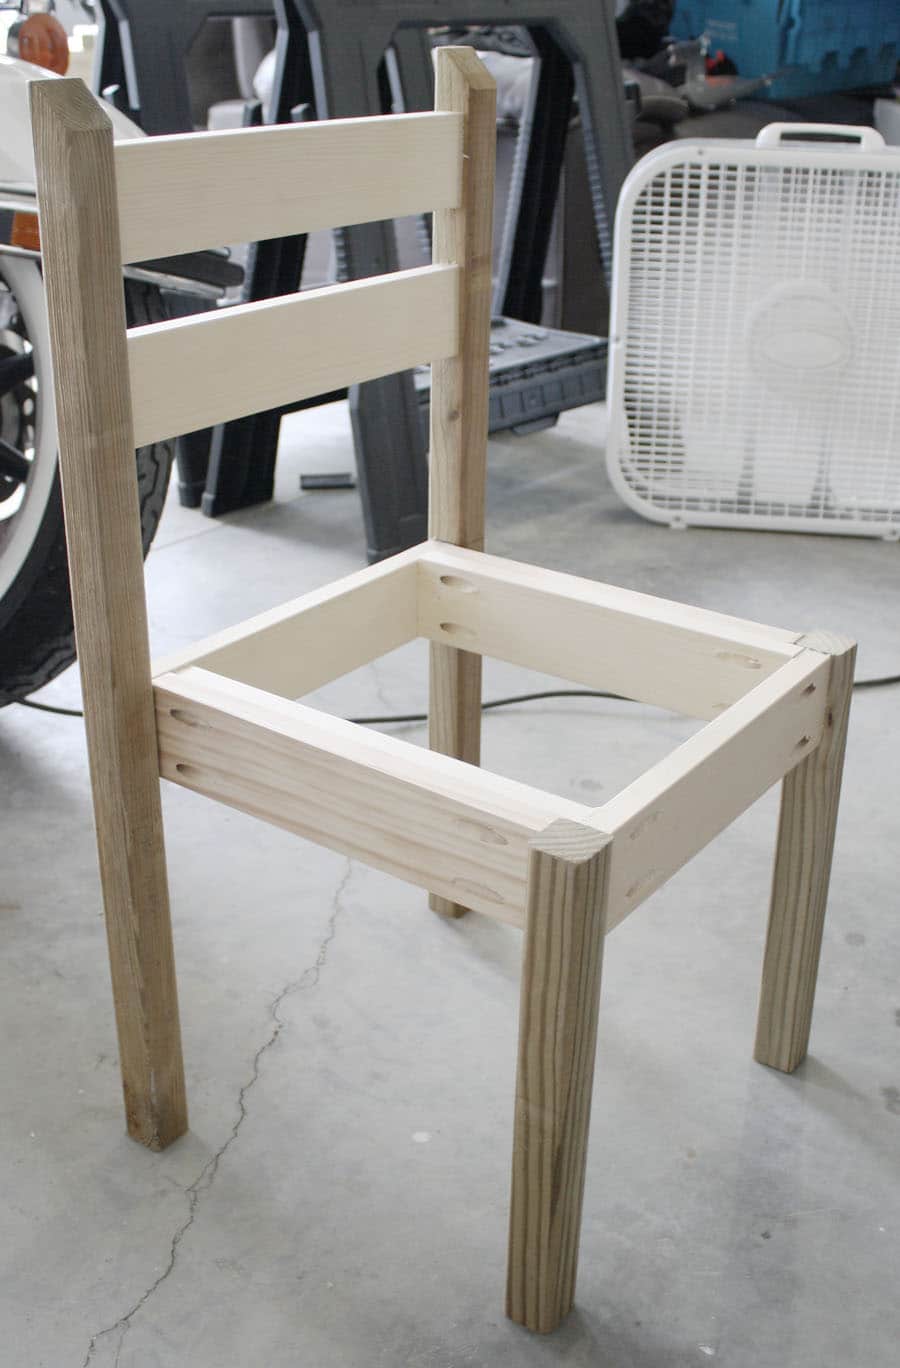 How to make kids chair